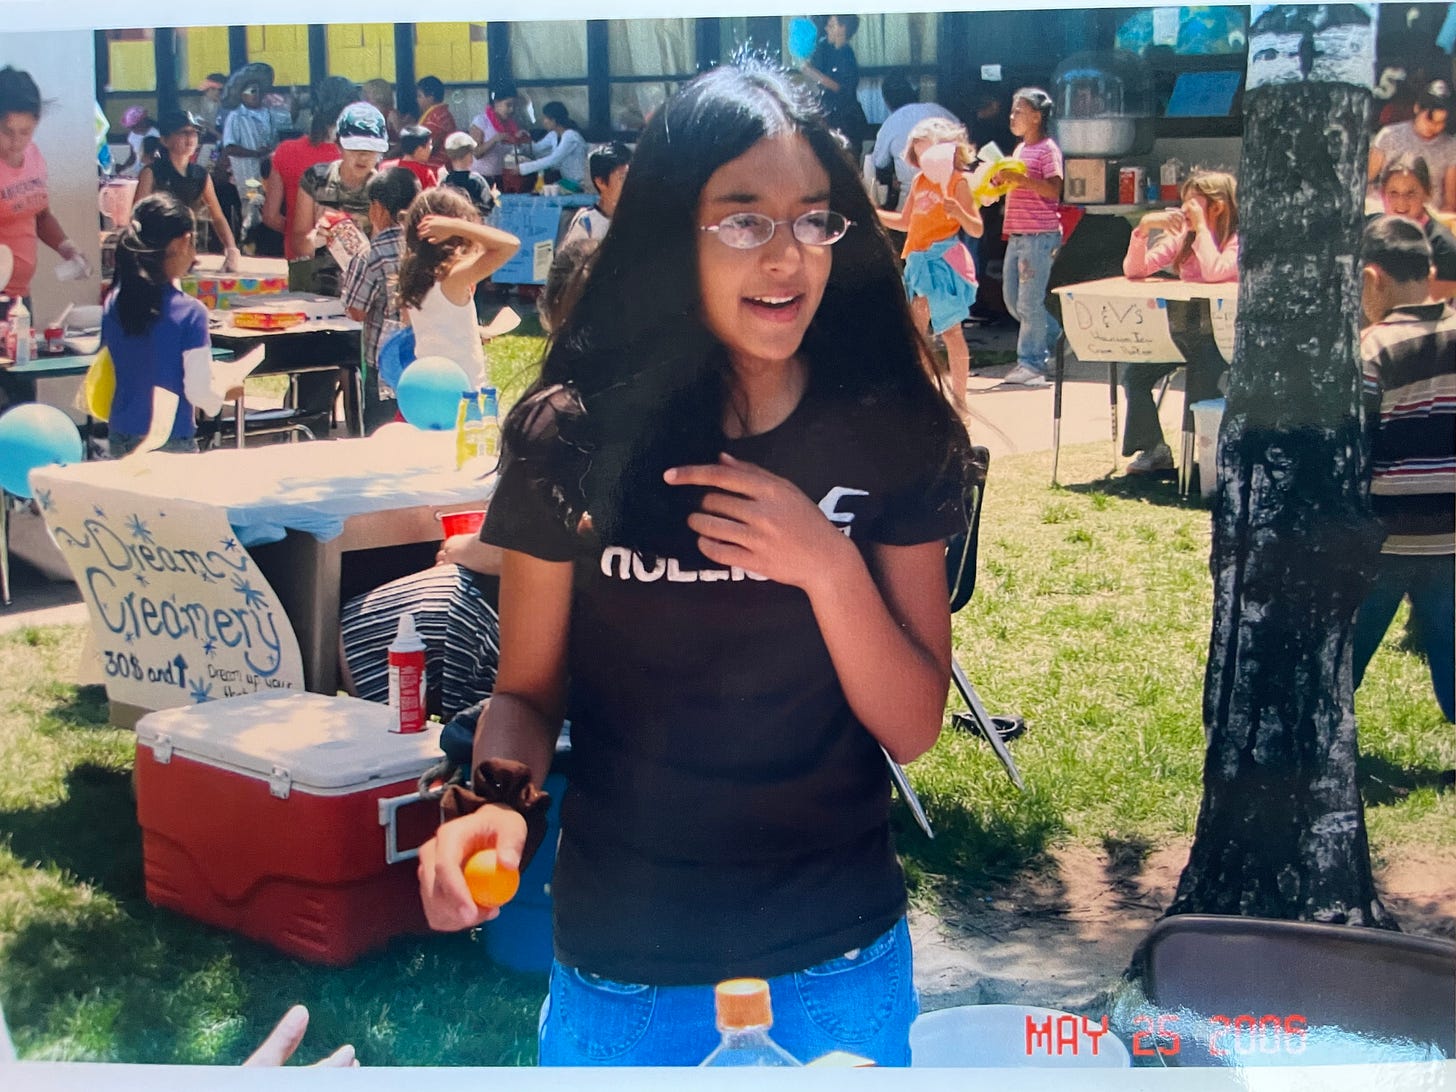 An Indian preteen girl wears a brown Hollister shirt and jeans. She wears glasses and flips her hair, holding an orange in one hand. She appears to be in a school fair setting.